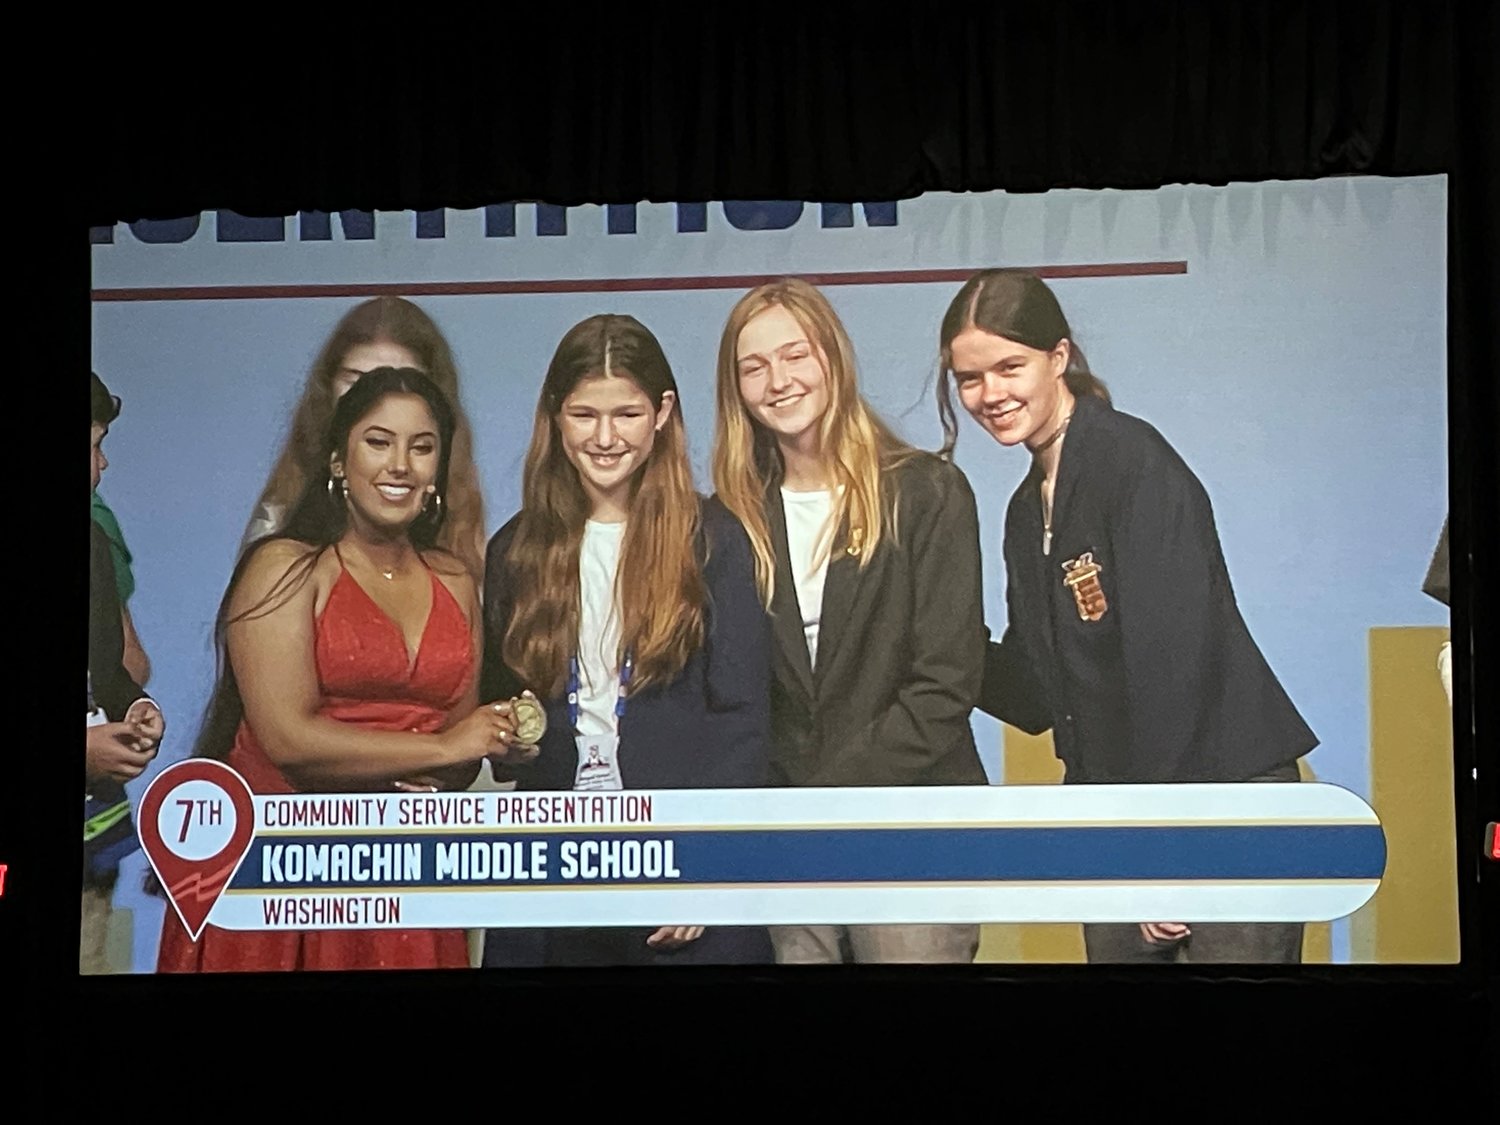 Community Service Presentation team members Alyssa Childers, Abigail Green and Natalie Terekhina, shown on the projection screen at  the McCormick Place Convention Center in Chicago at the FBLA conference.